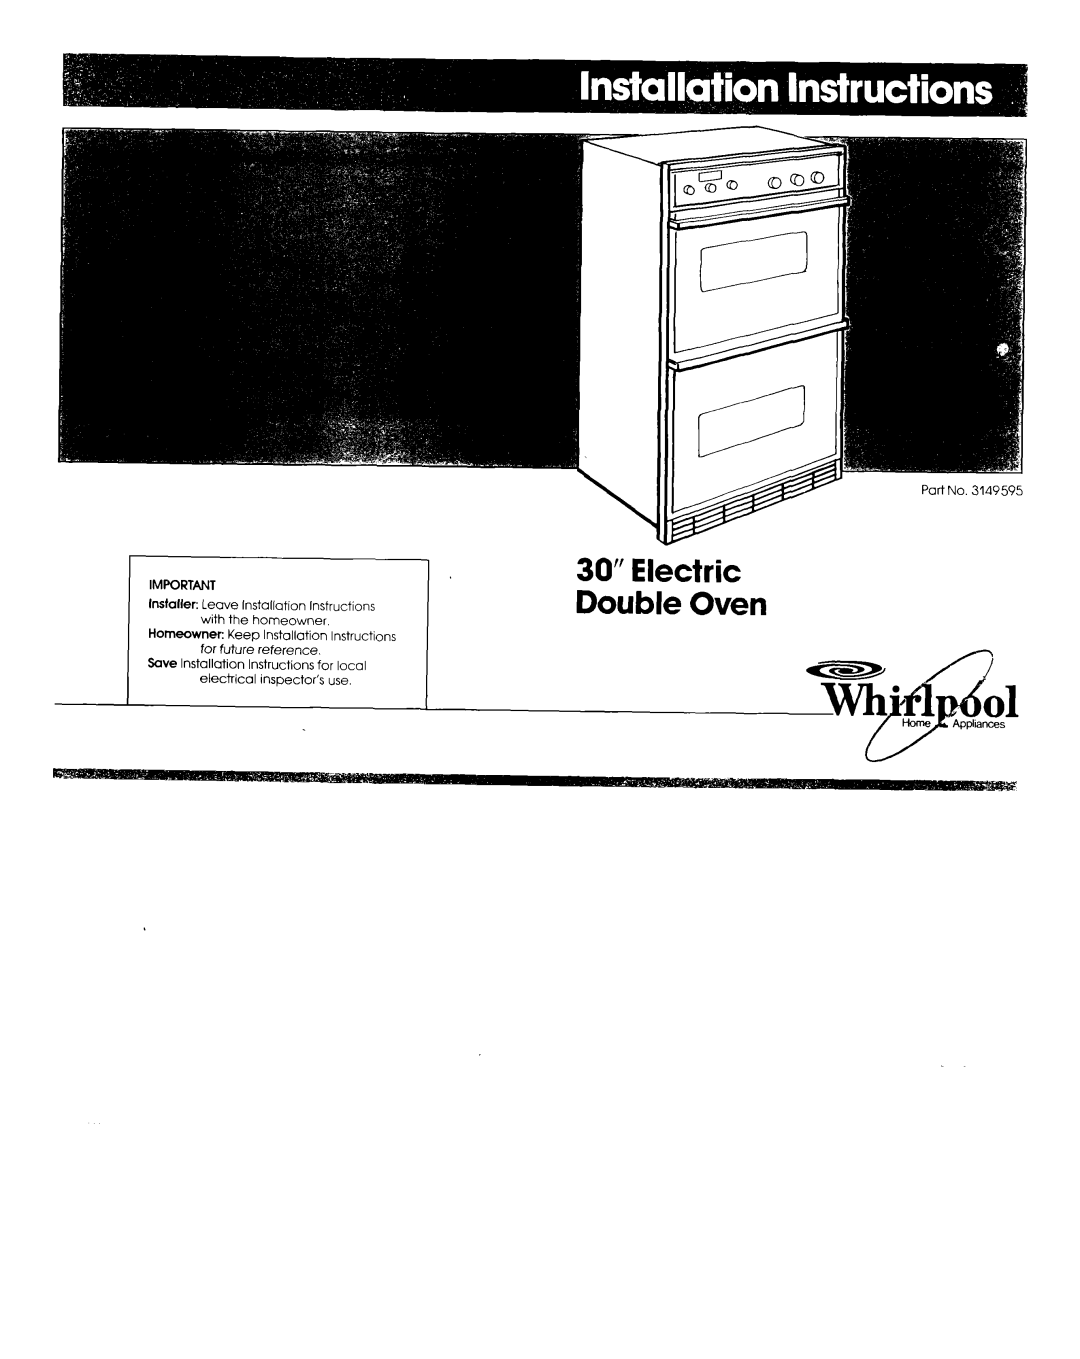 Whirlpool 3149595 installation instructions 30” Electric Double Oven, Installer Leave Installation Instructions 